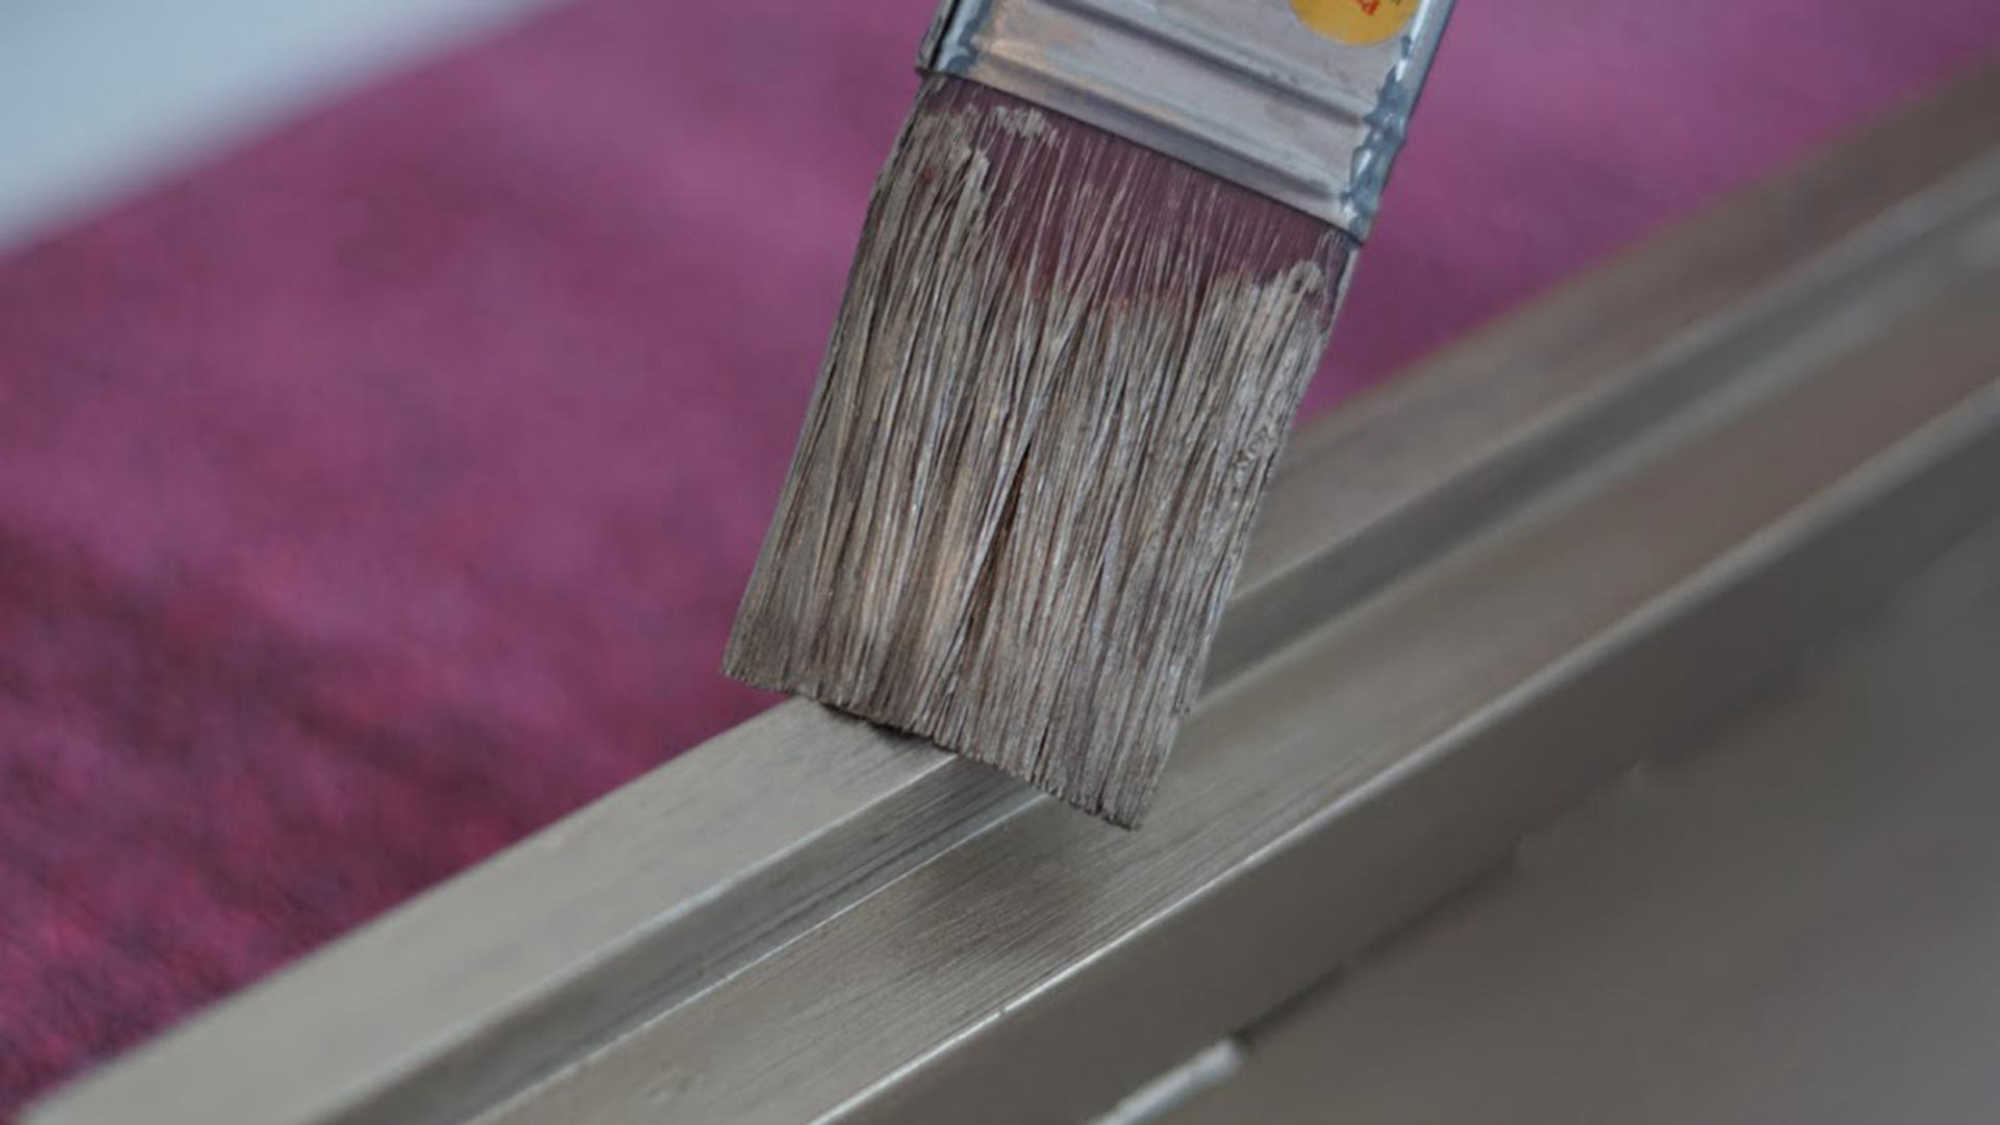 A desk being painted with a brush